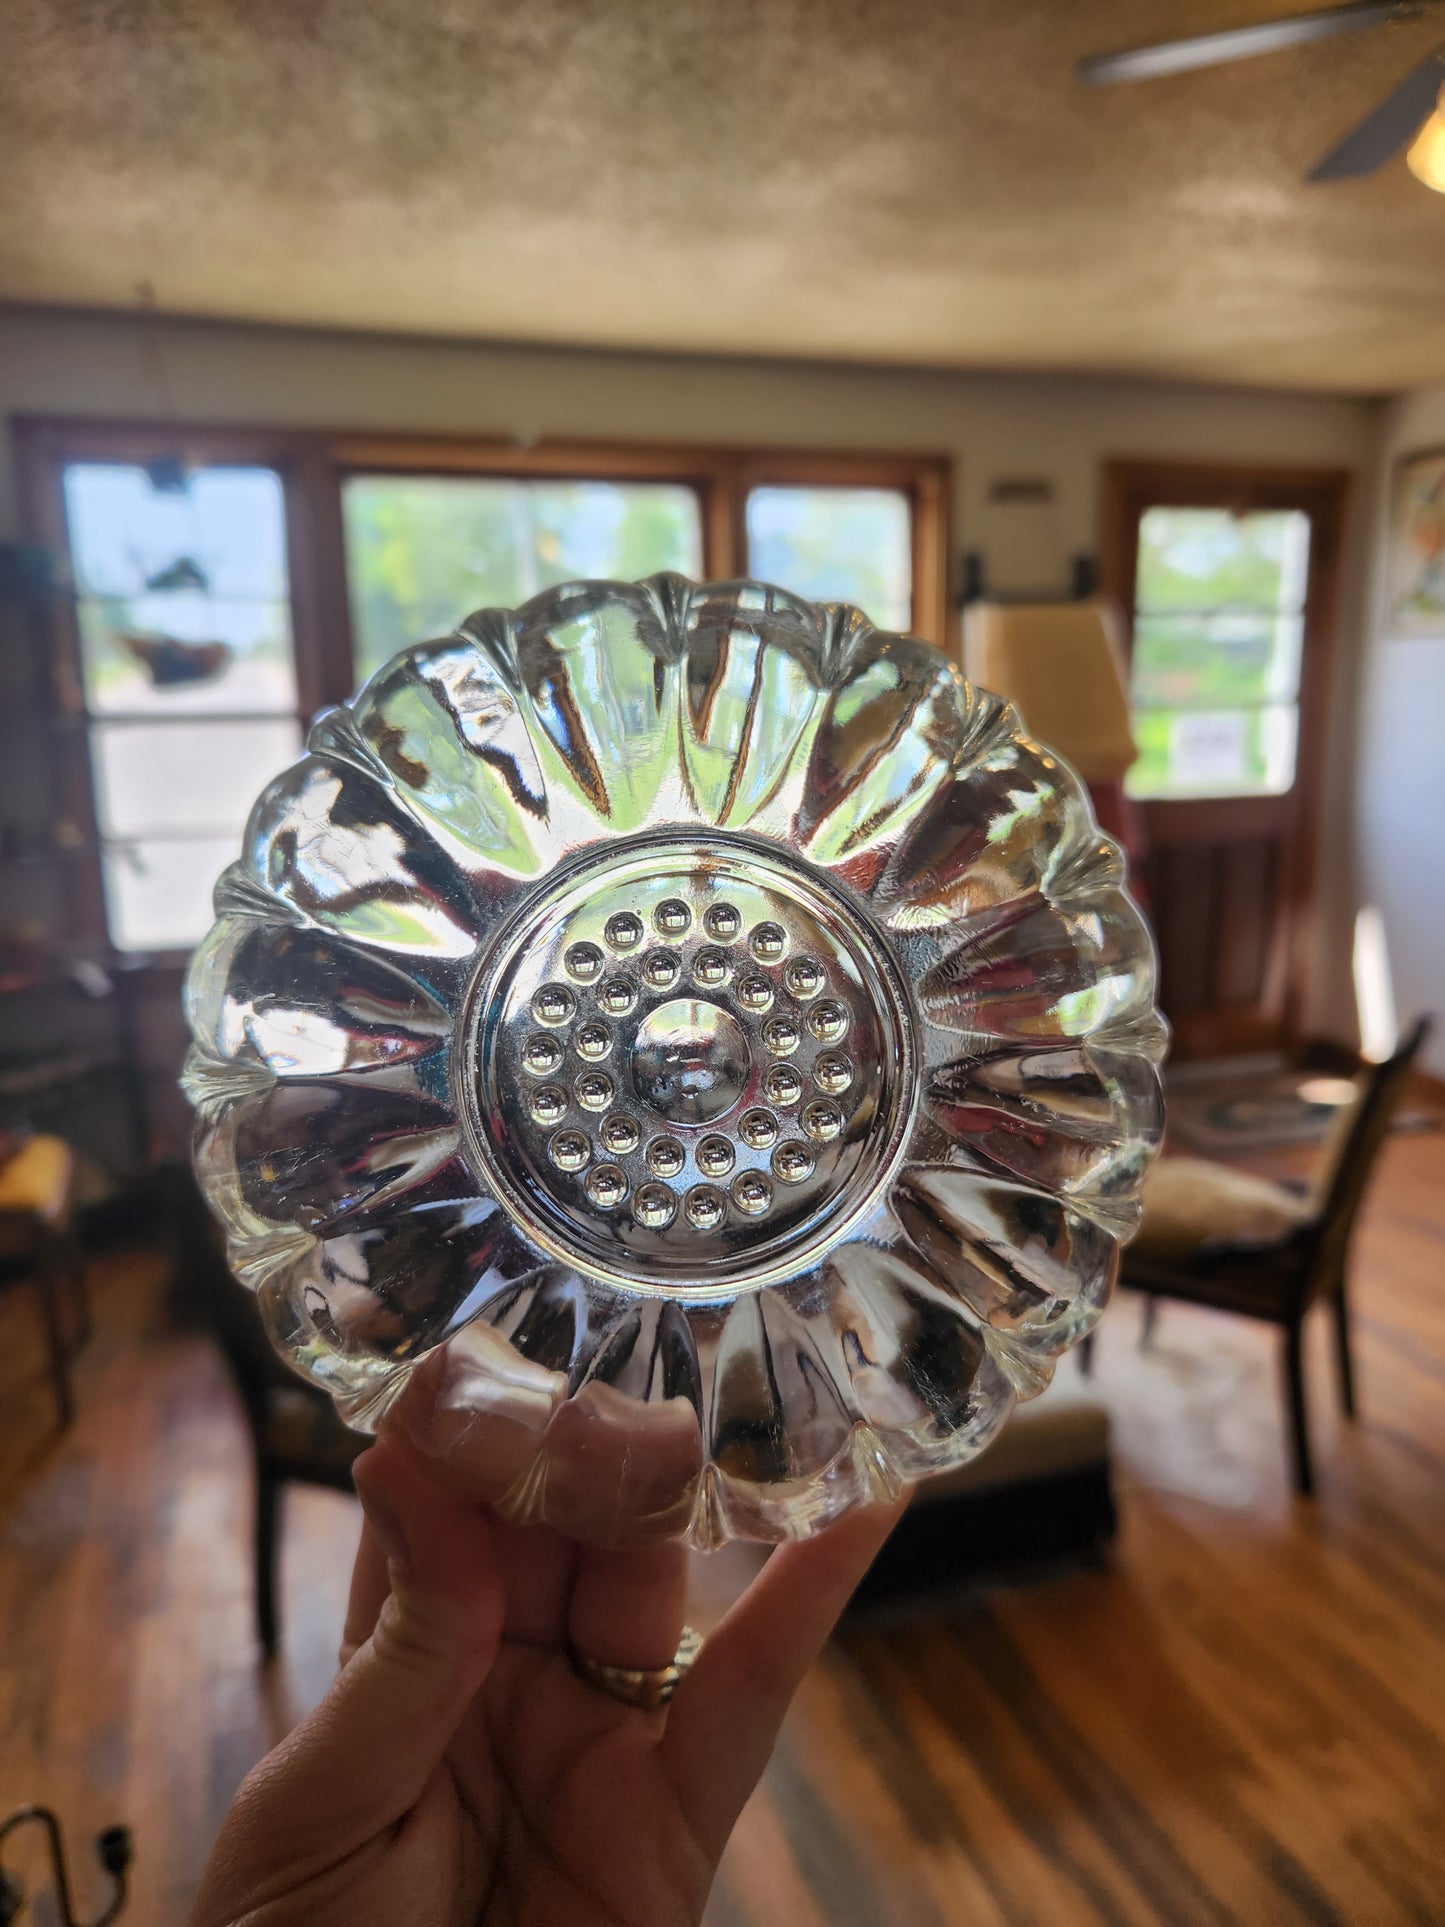 Clear Glass Flower Bowl